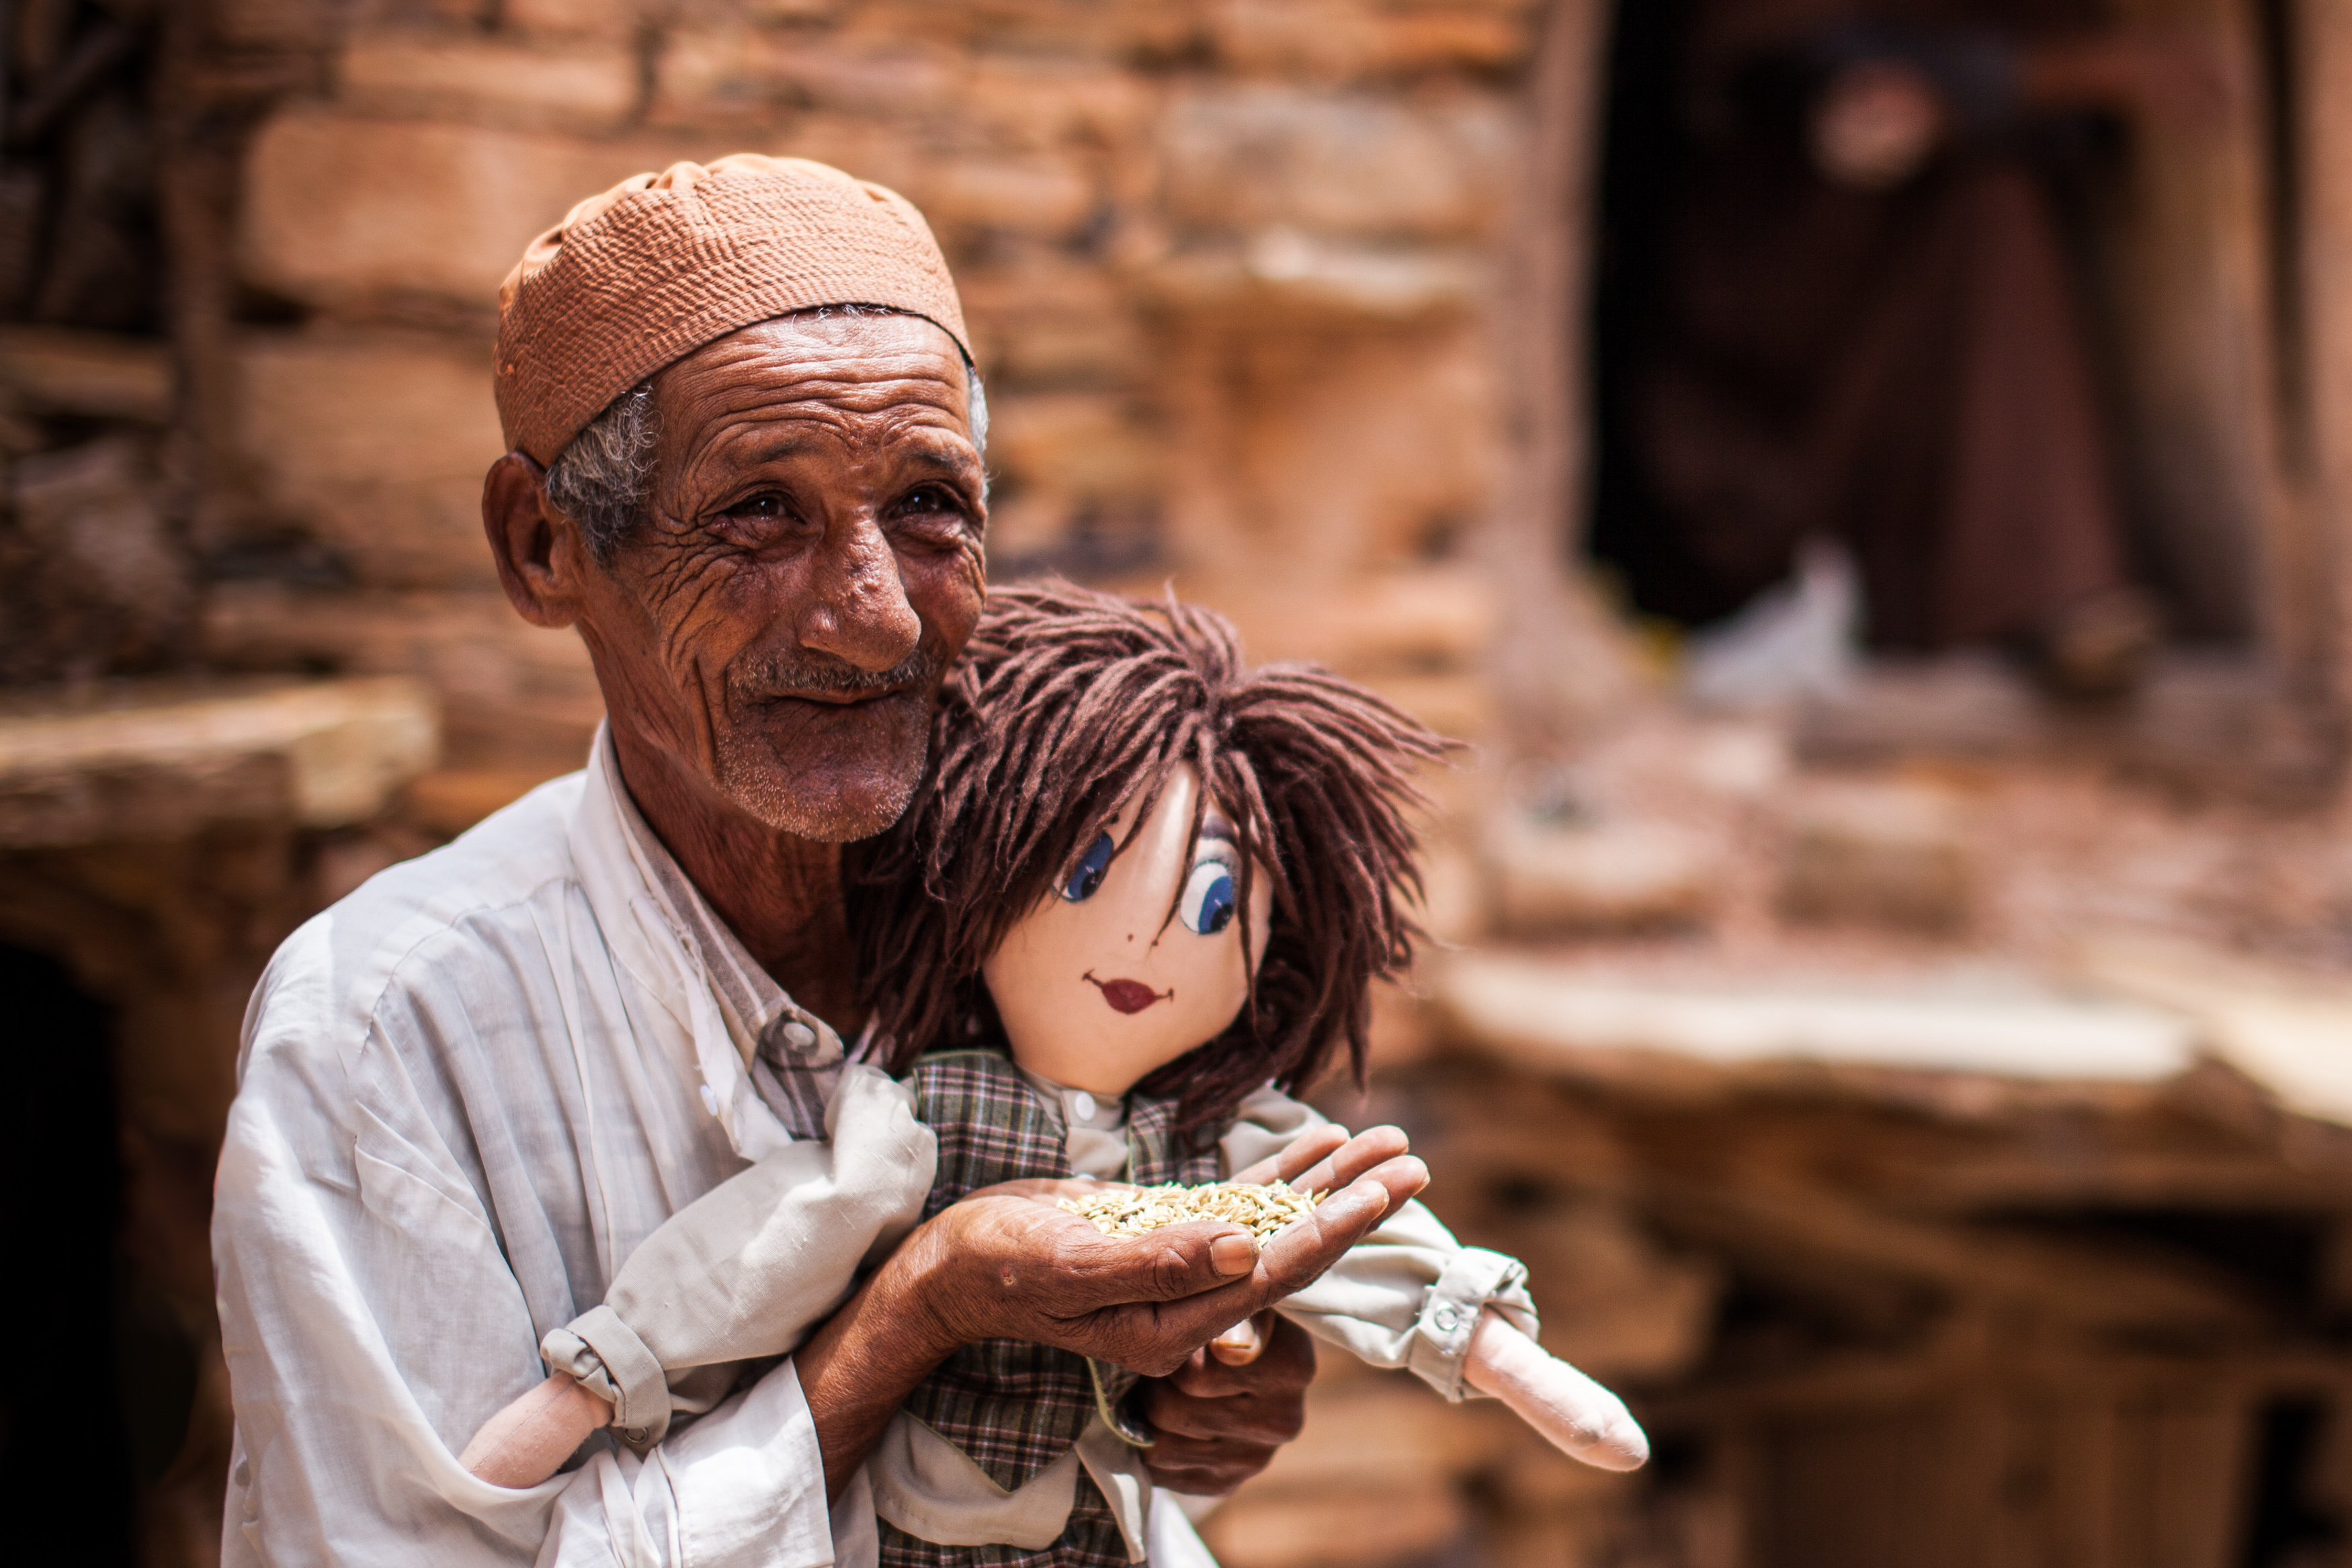 Photo of an old Moroccan man Lamine of an Igoudar (i.e. guardian of a community granary), with a rag doll.